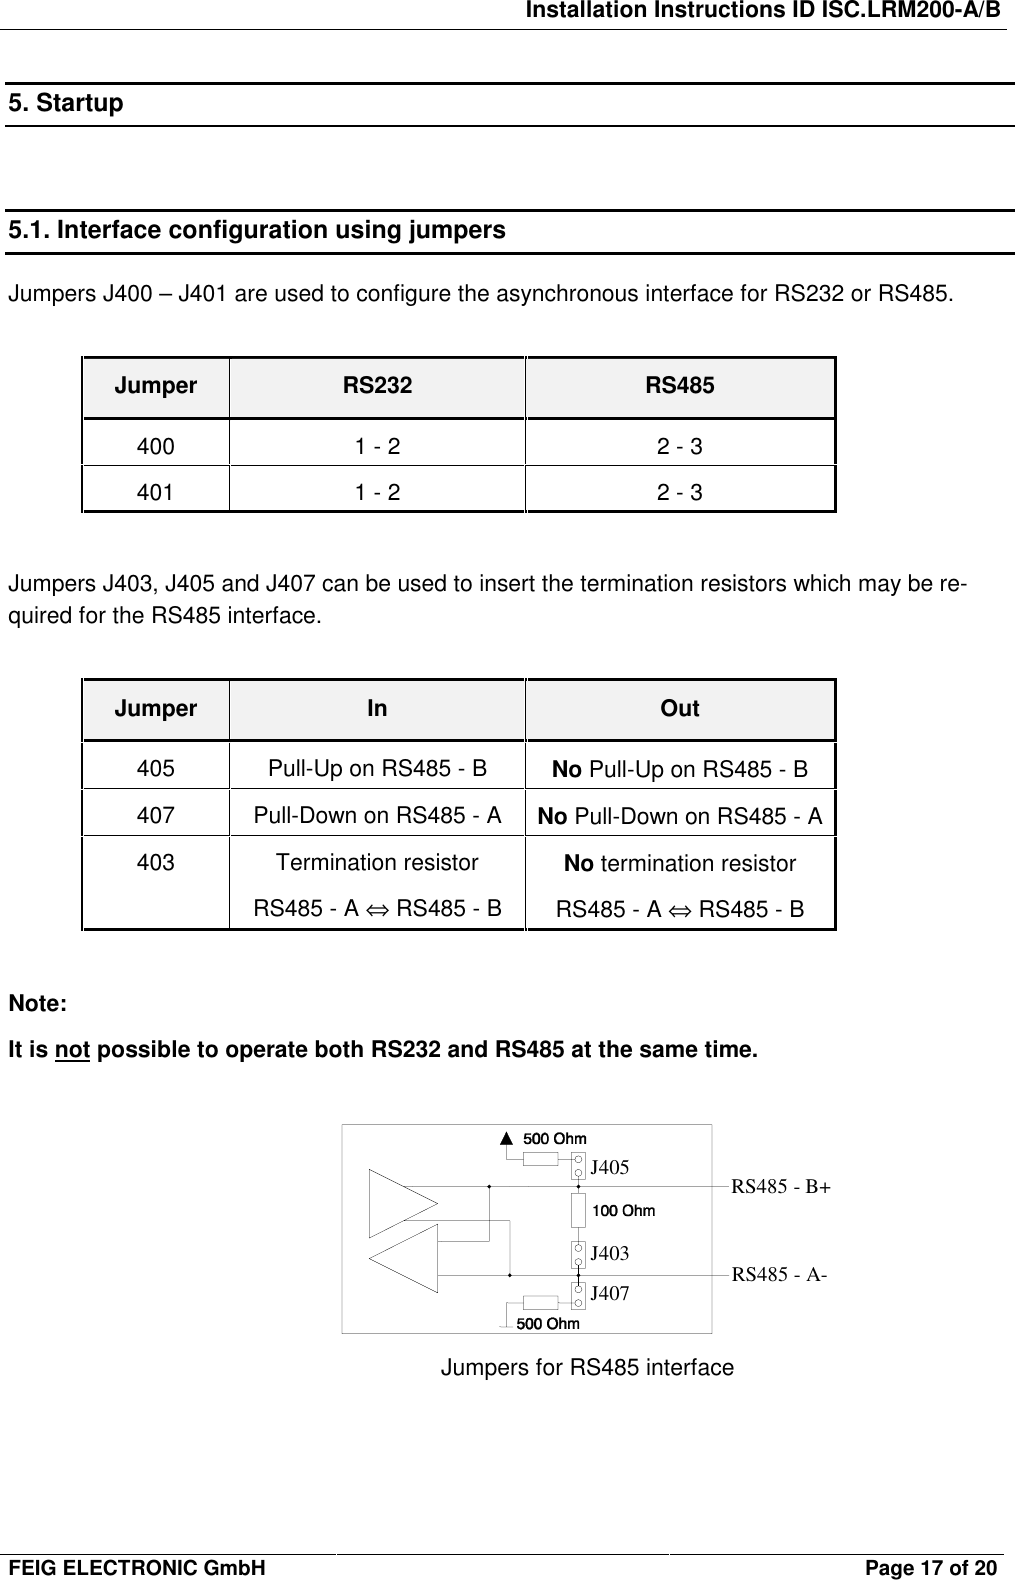 Installation Instructions ID ISC.LRM200-A/BFEIG ELECTRONIC GmbH Page 17 of 205. Startup5.1. Interface configuration using jumpersJumpers J400 – J401 are used to configure the asynchronous interface for RS232 or RS485.Jumper RS232 RS485400 1 - 2 2 - 3401 1 - 2 2 - 3Jumpers J403, J405 and J407 can be used to insert the termination resistors which may be re-quired for the RS485 interface.Jumper In Out405 Pull-Up on RS485 - B No Pull-Up on RS485 - B407 Pull-Down on RS485 - A No Pull-Down on RS485 - A403 Termination resistorRS485 - A ⇔ RS485 - BNo termination resistorRS485 - A ⇔ RS485 - BNote:It is not possible to operate both RS232 and RS485 at the same time.J405J403J407RS485 - B+RS485 - A-Jumpers for RS485 interface